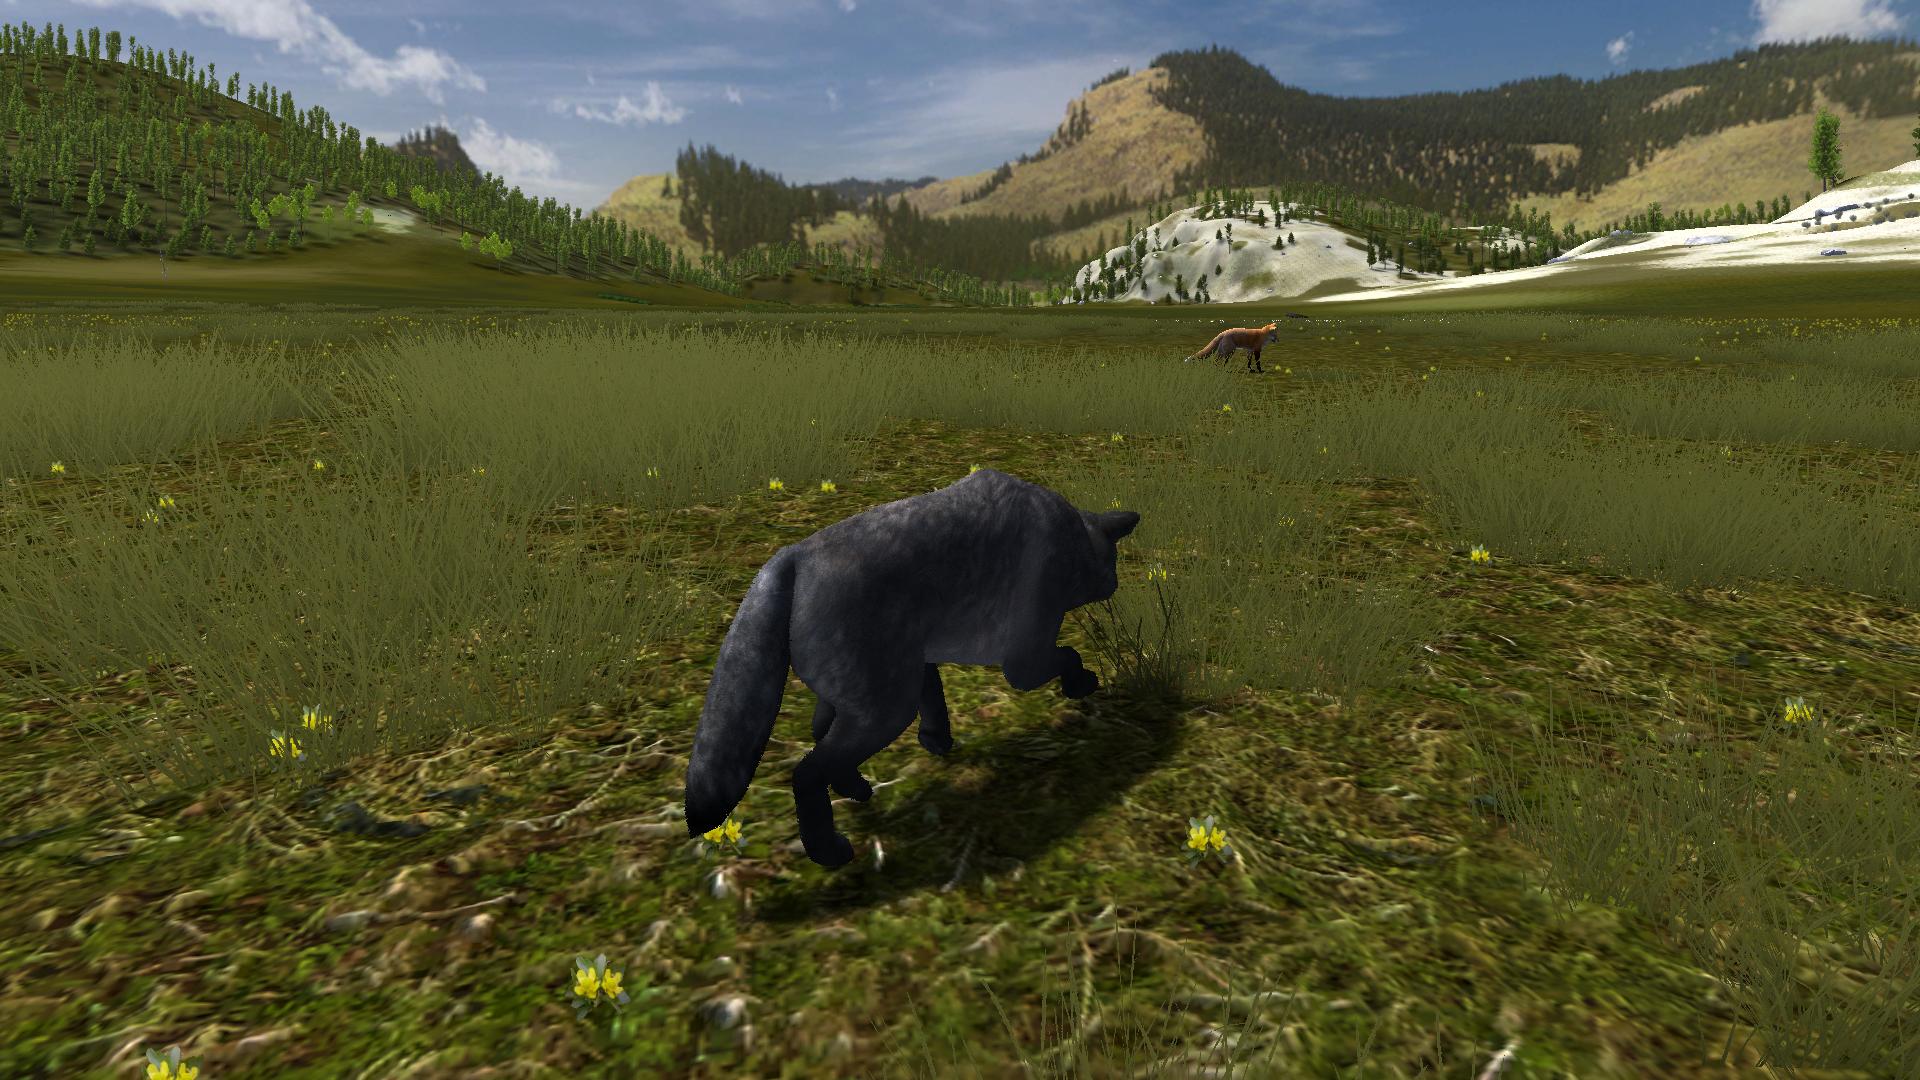 wolfquest 2.5 system requirements